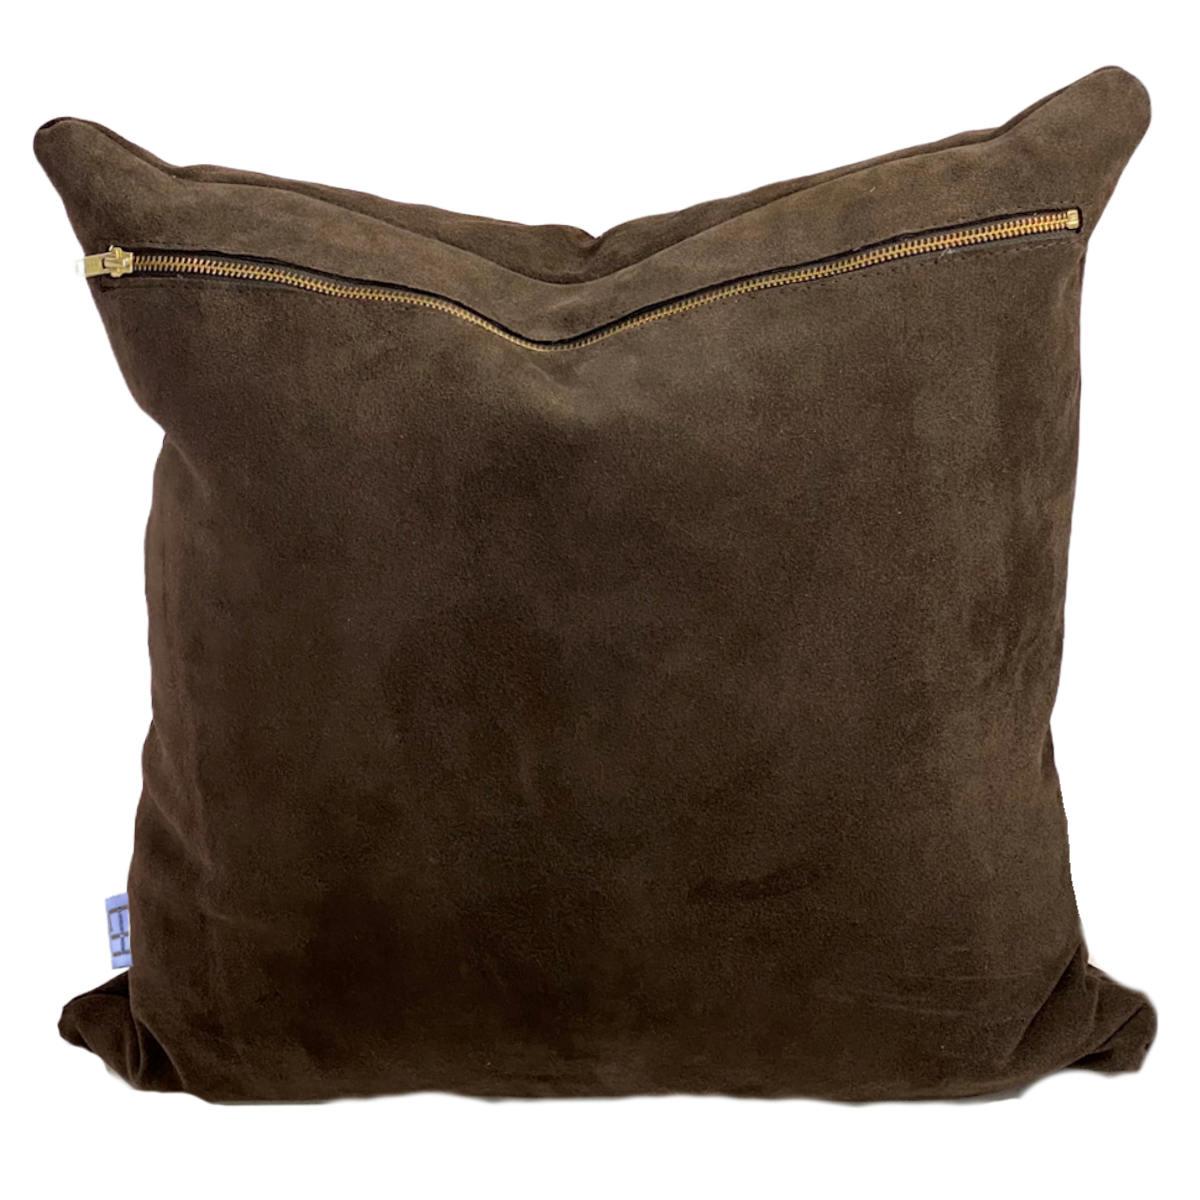 

Delicious Chocolate brown, Spanish leather suede pillows, individually handcrafted in Australia, by leather artisans.
Each brown leather pillow comes with a single front and back leather panel with a decorative brass metal back zipper, and is